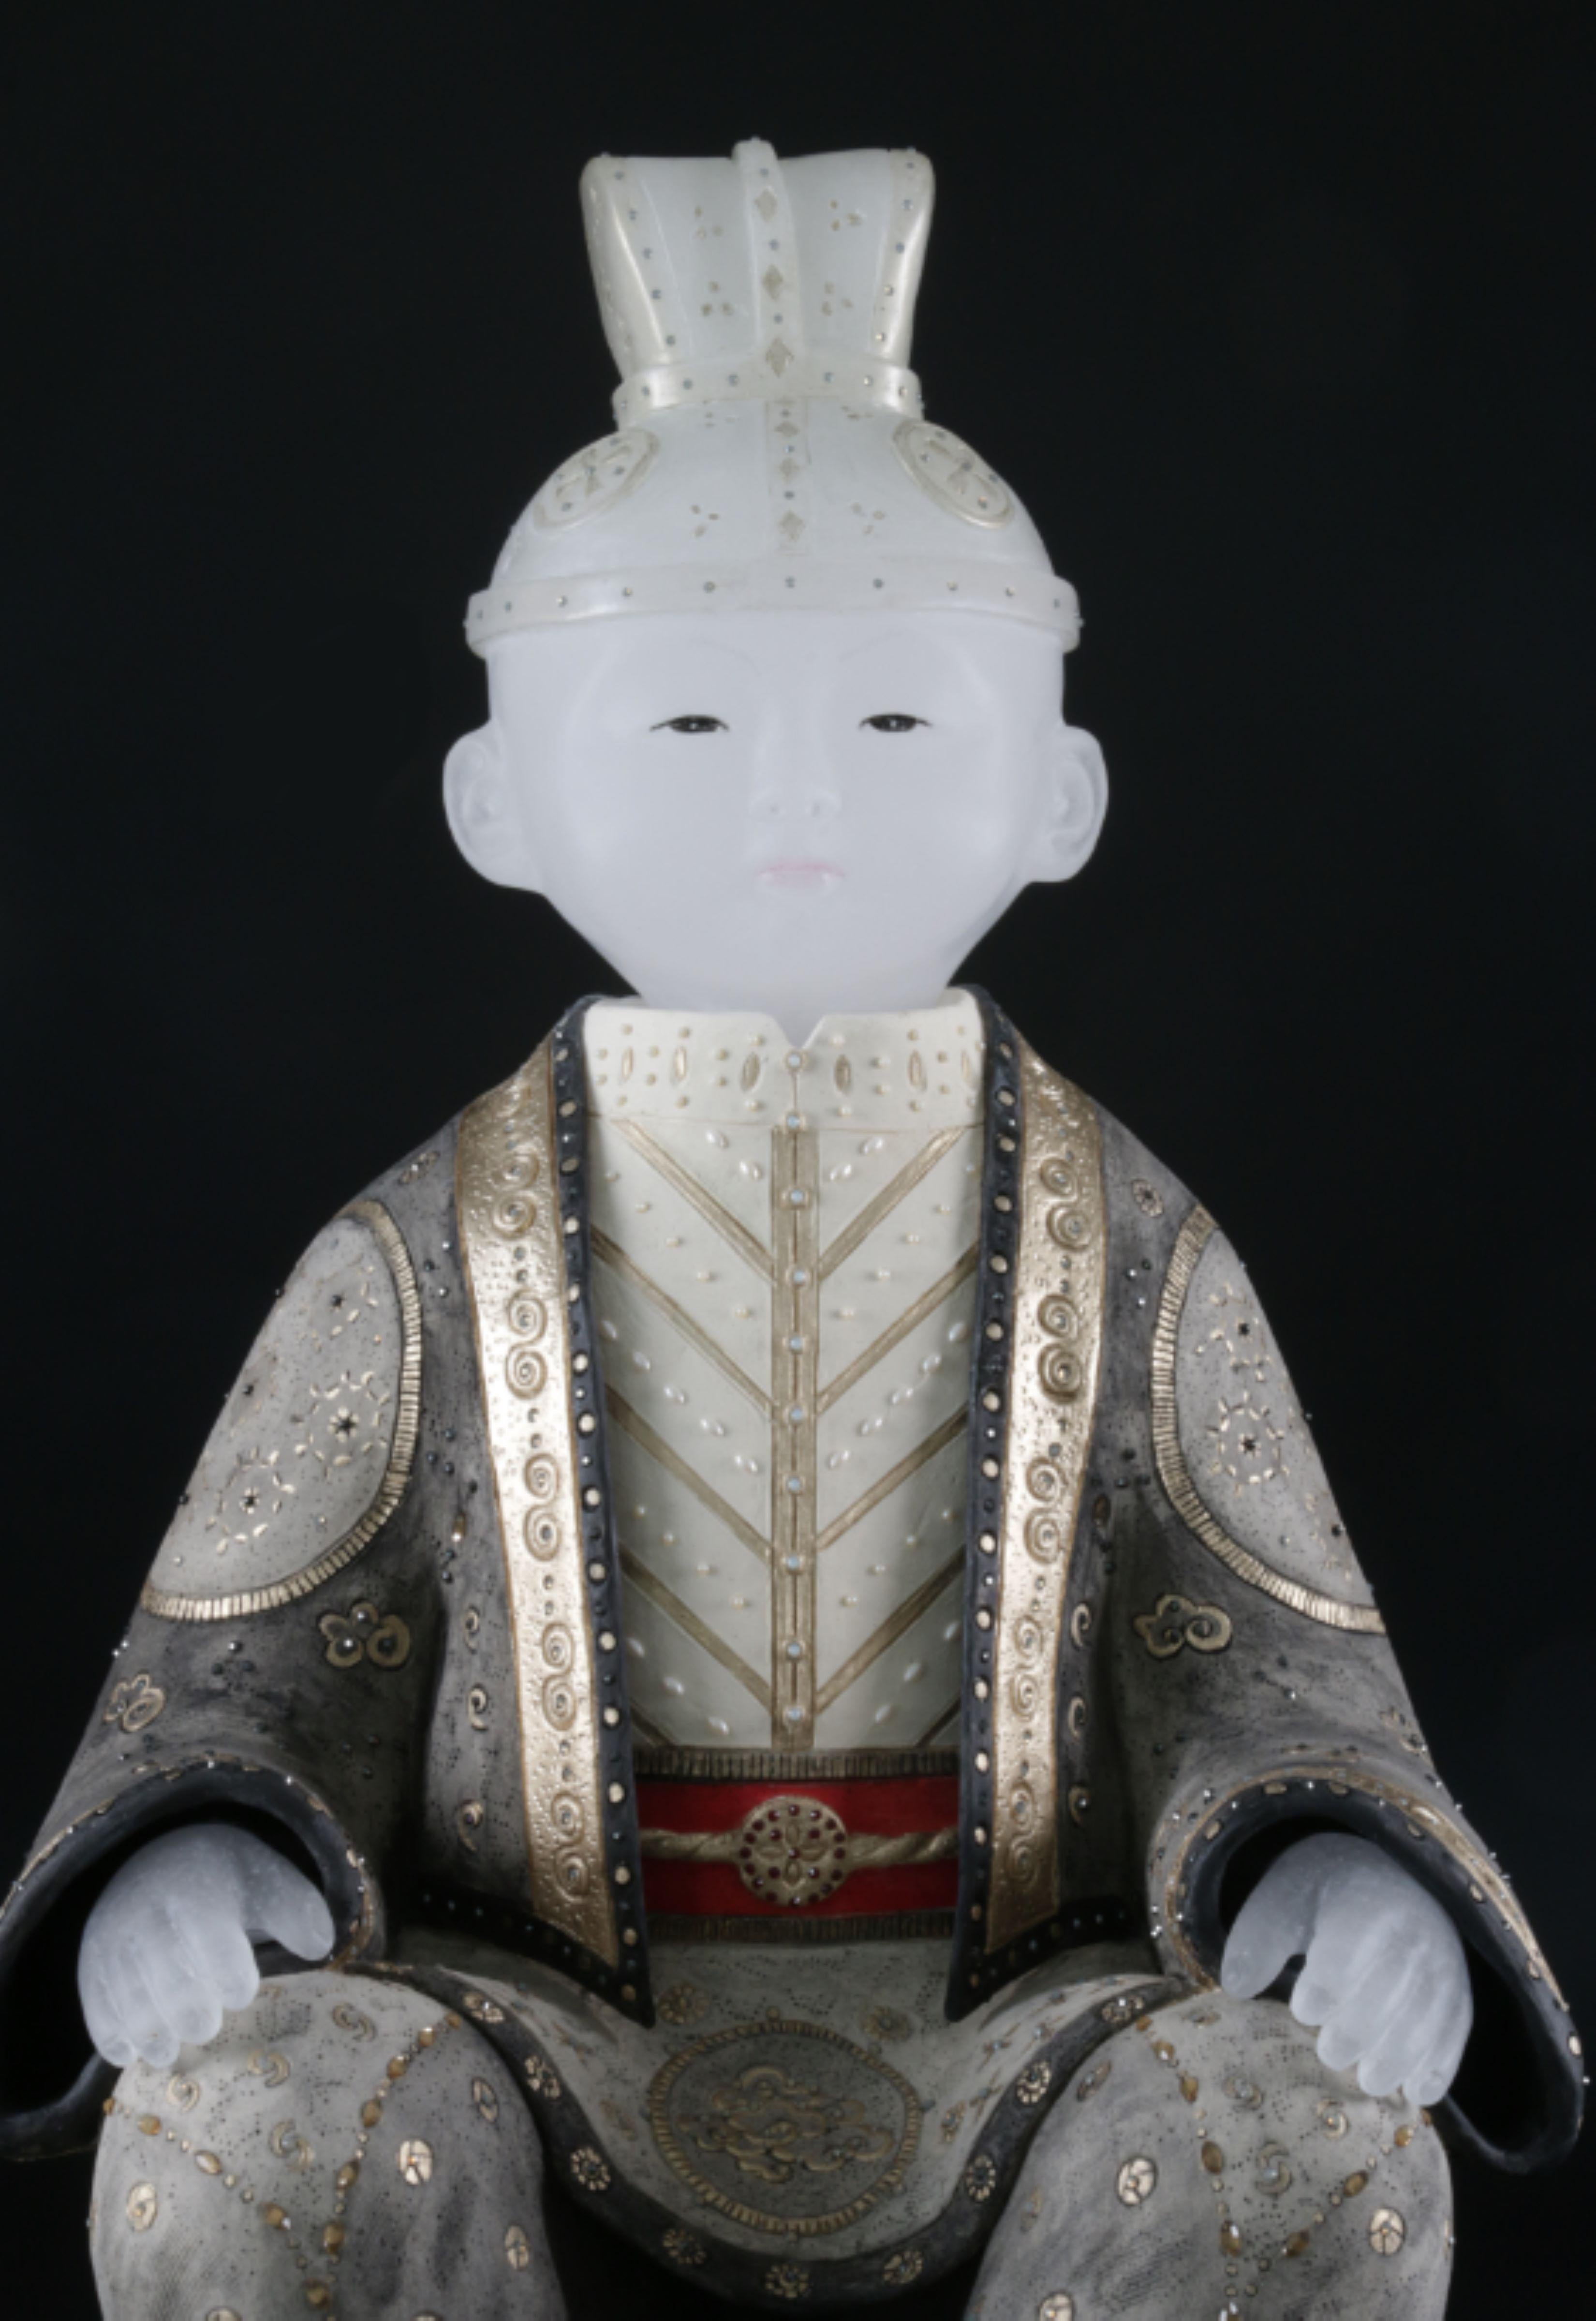 CELESTIAL portrays a very young boy in the style of a Gosho Doll. The inspiration for this piece came from the Gosho dolls made during the Edo Period of Japan (1603-1867), a time when the arts flourished. They were never meant to be played with.